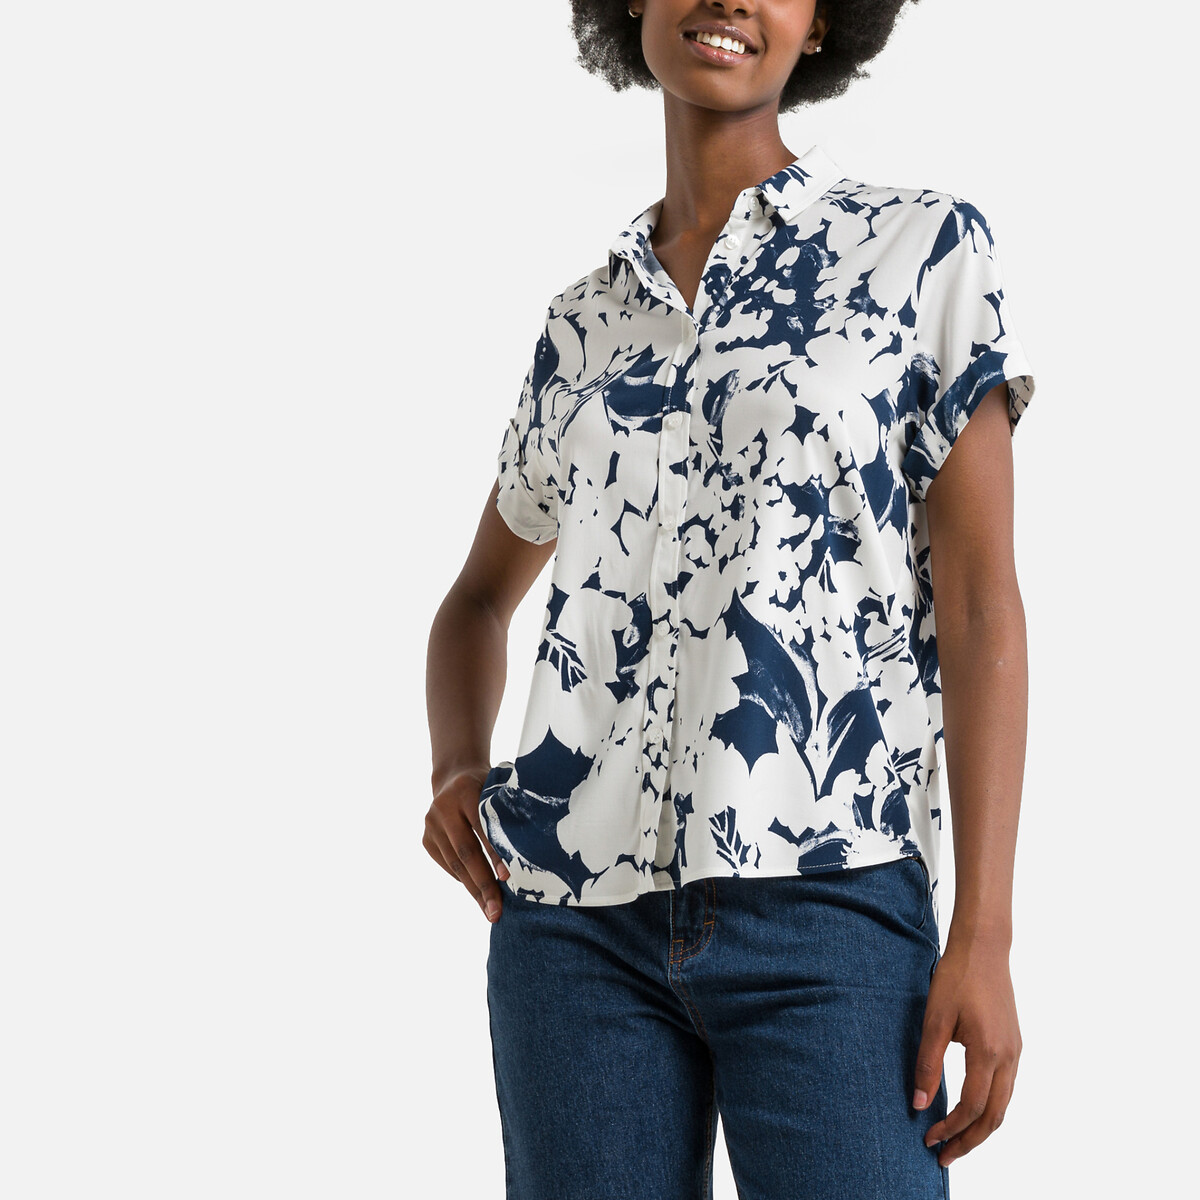 Majan Graphic Print Blouse with Short Sleeves